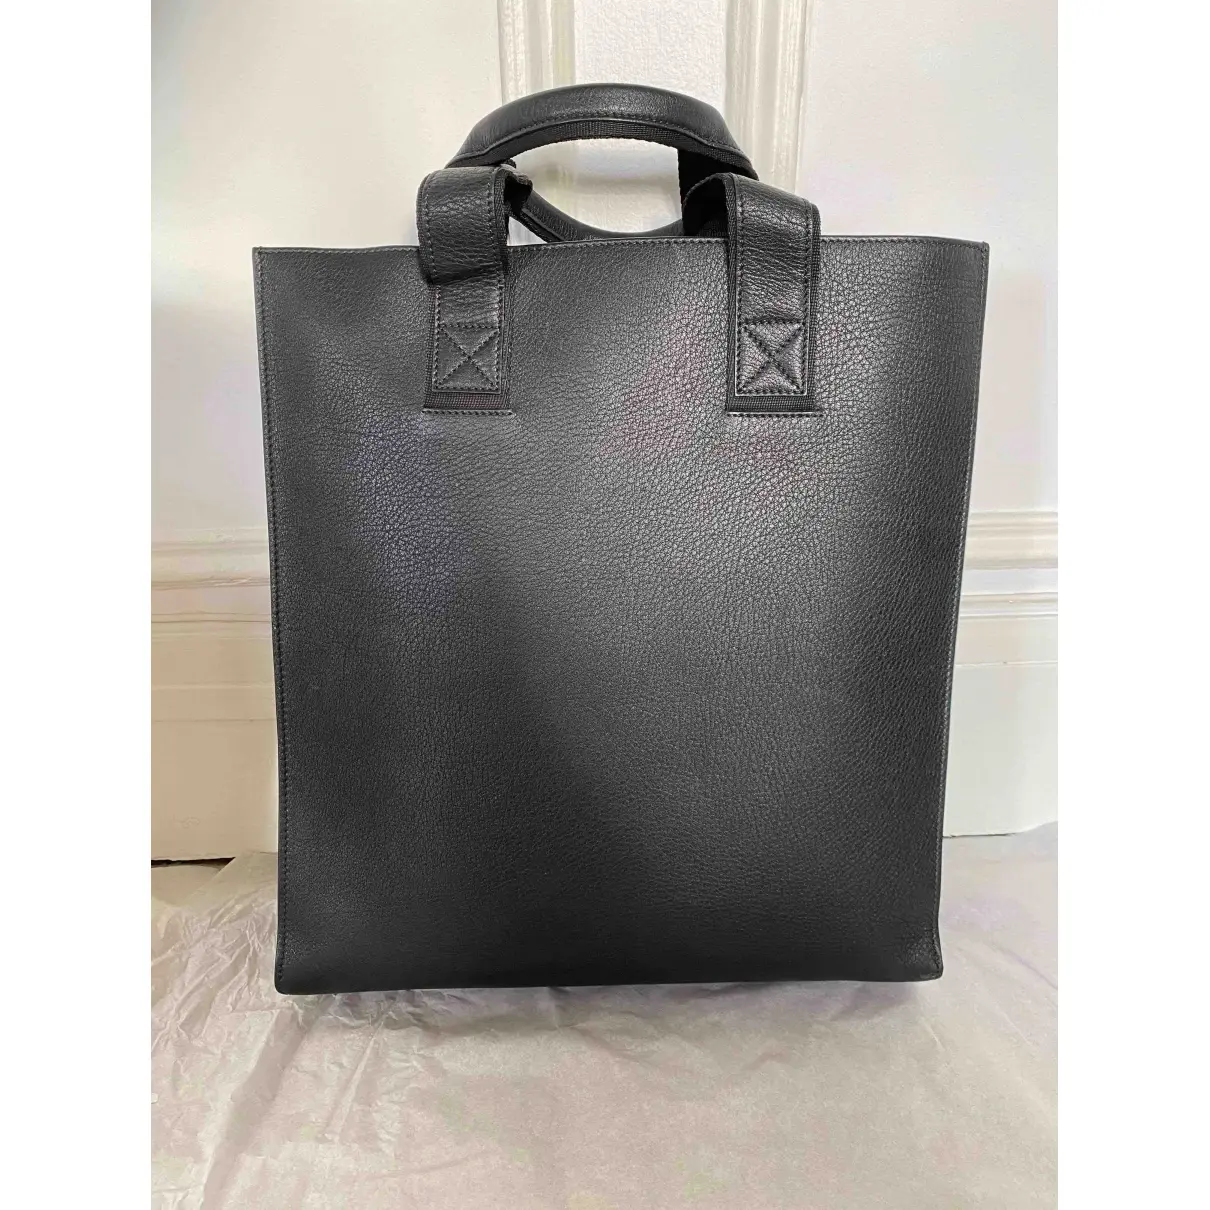 Buy Givenchy Leather satchel online